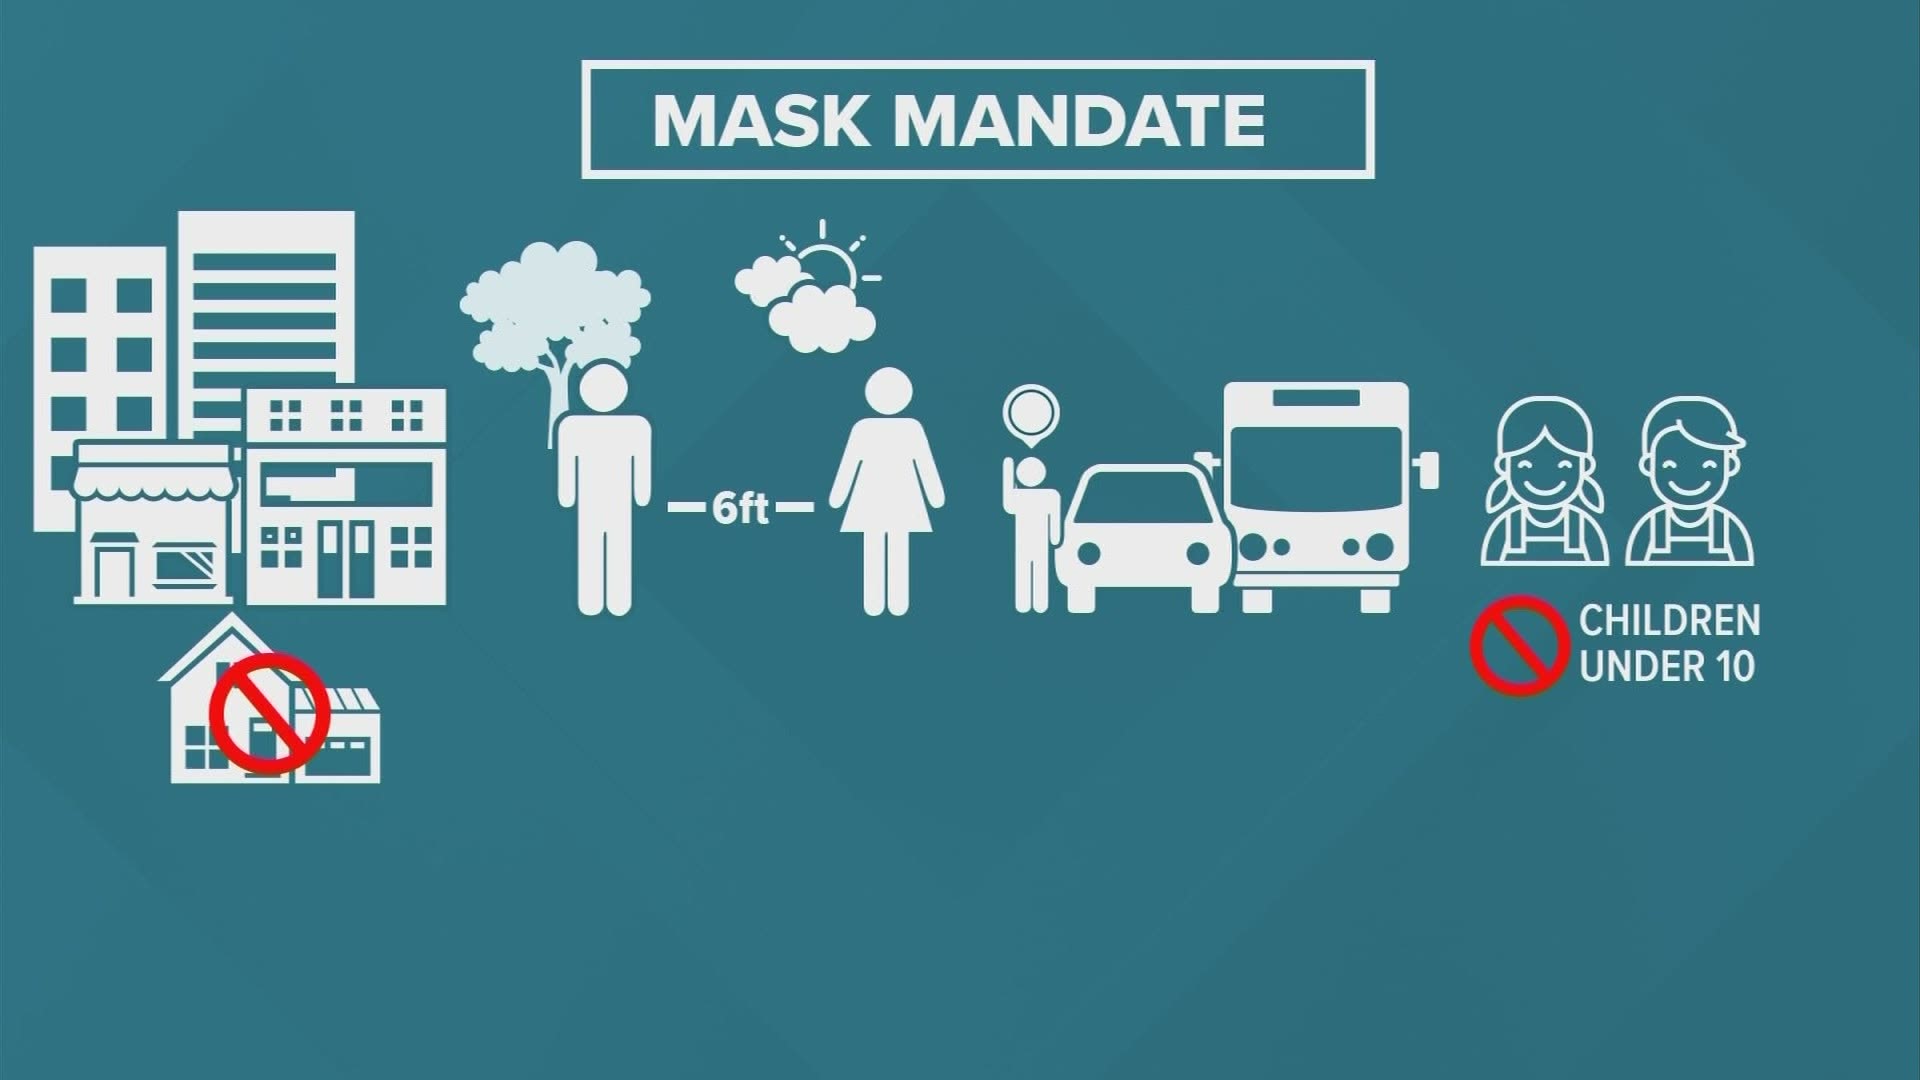 People are encouraged to wear their masks everyday.